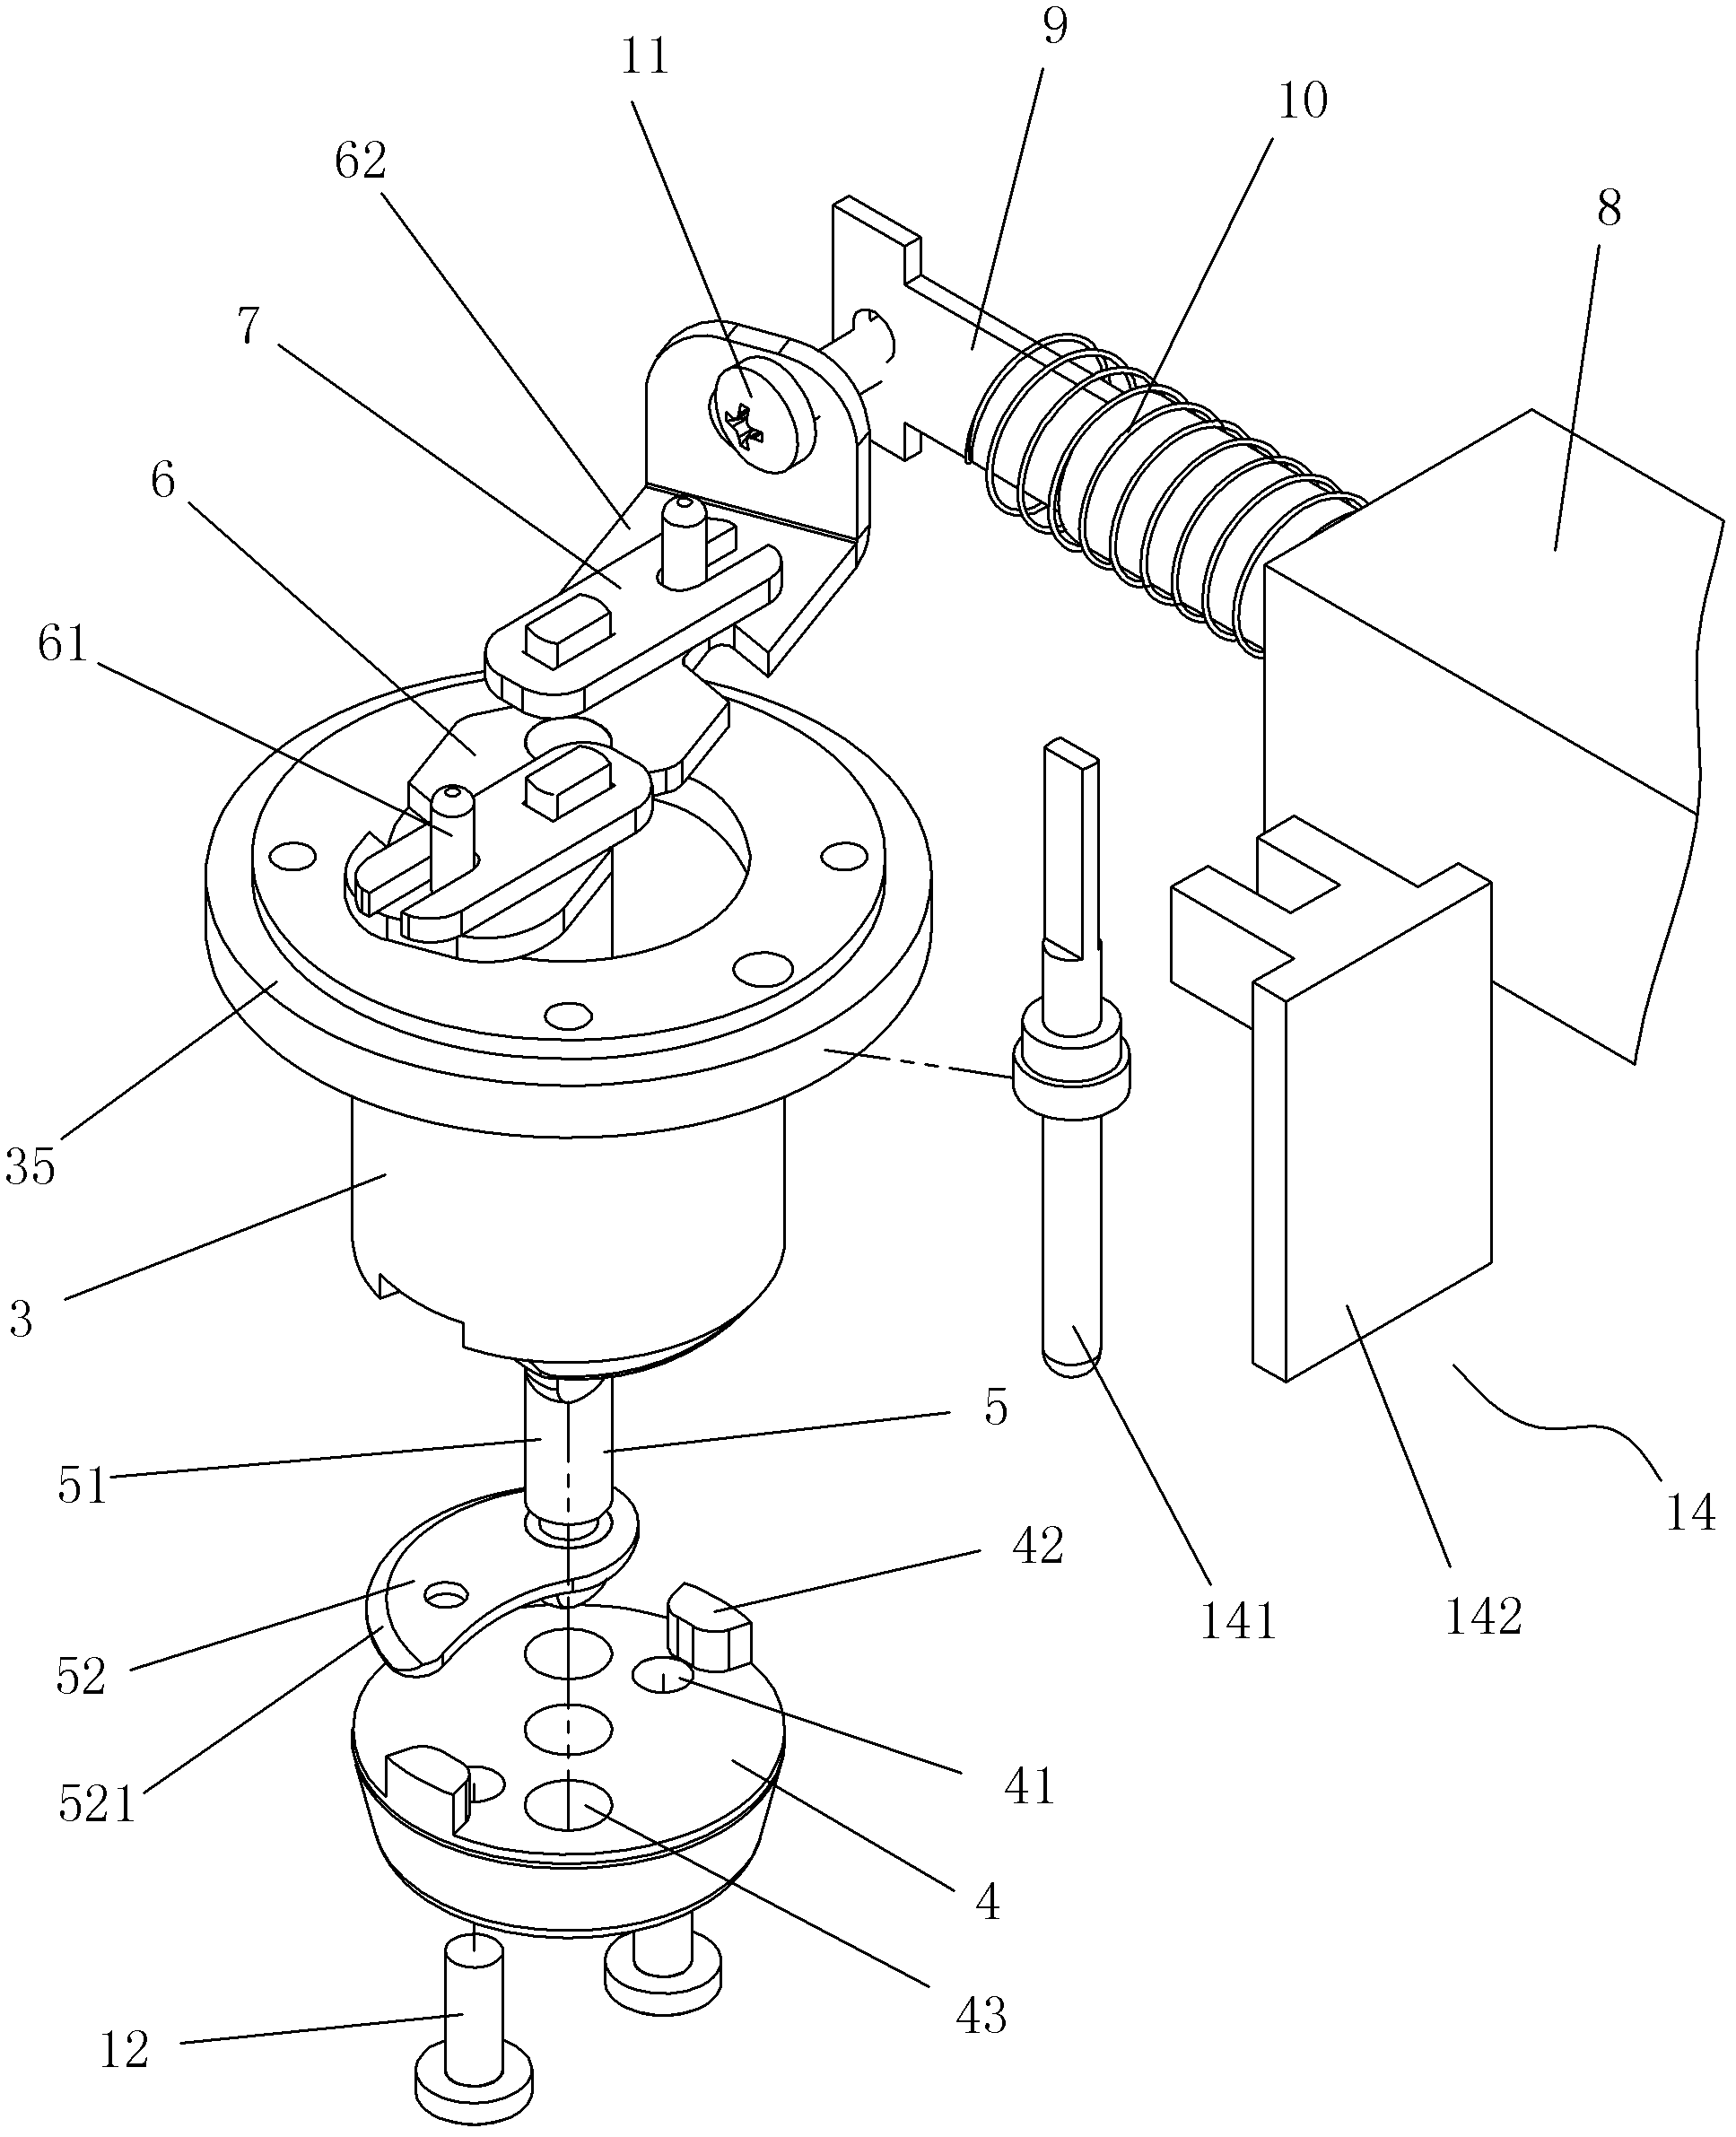 Automatic disk grabbing device for compact-disk server